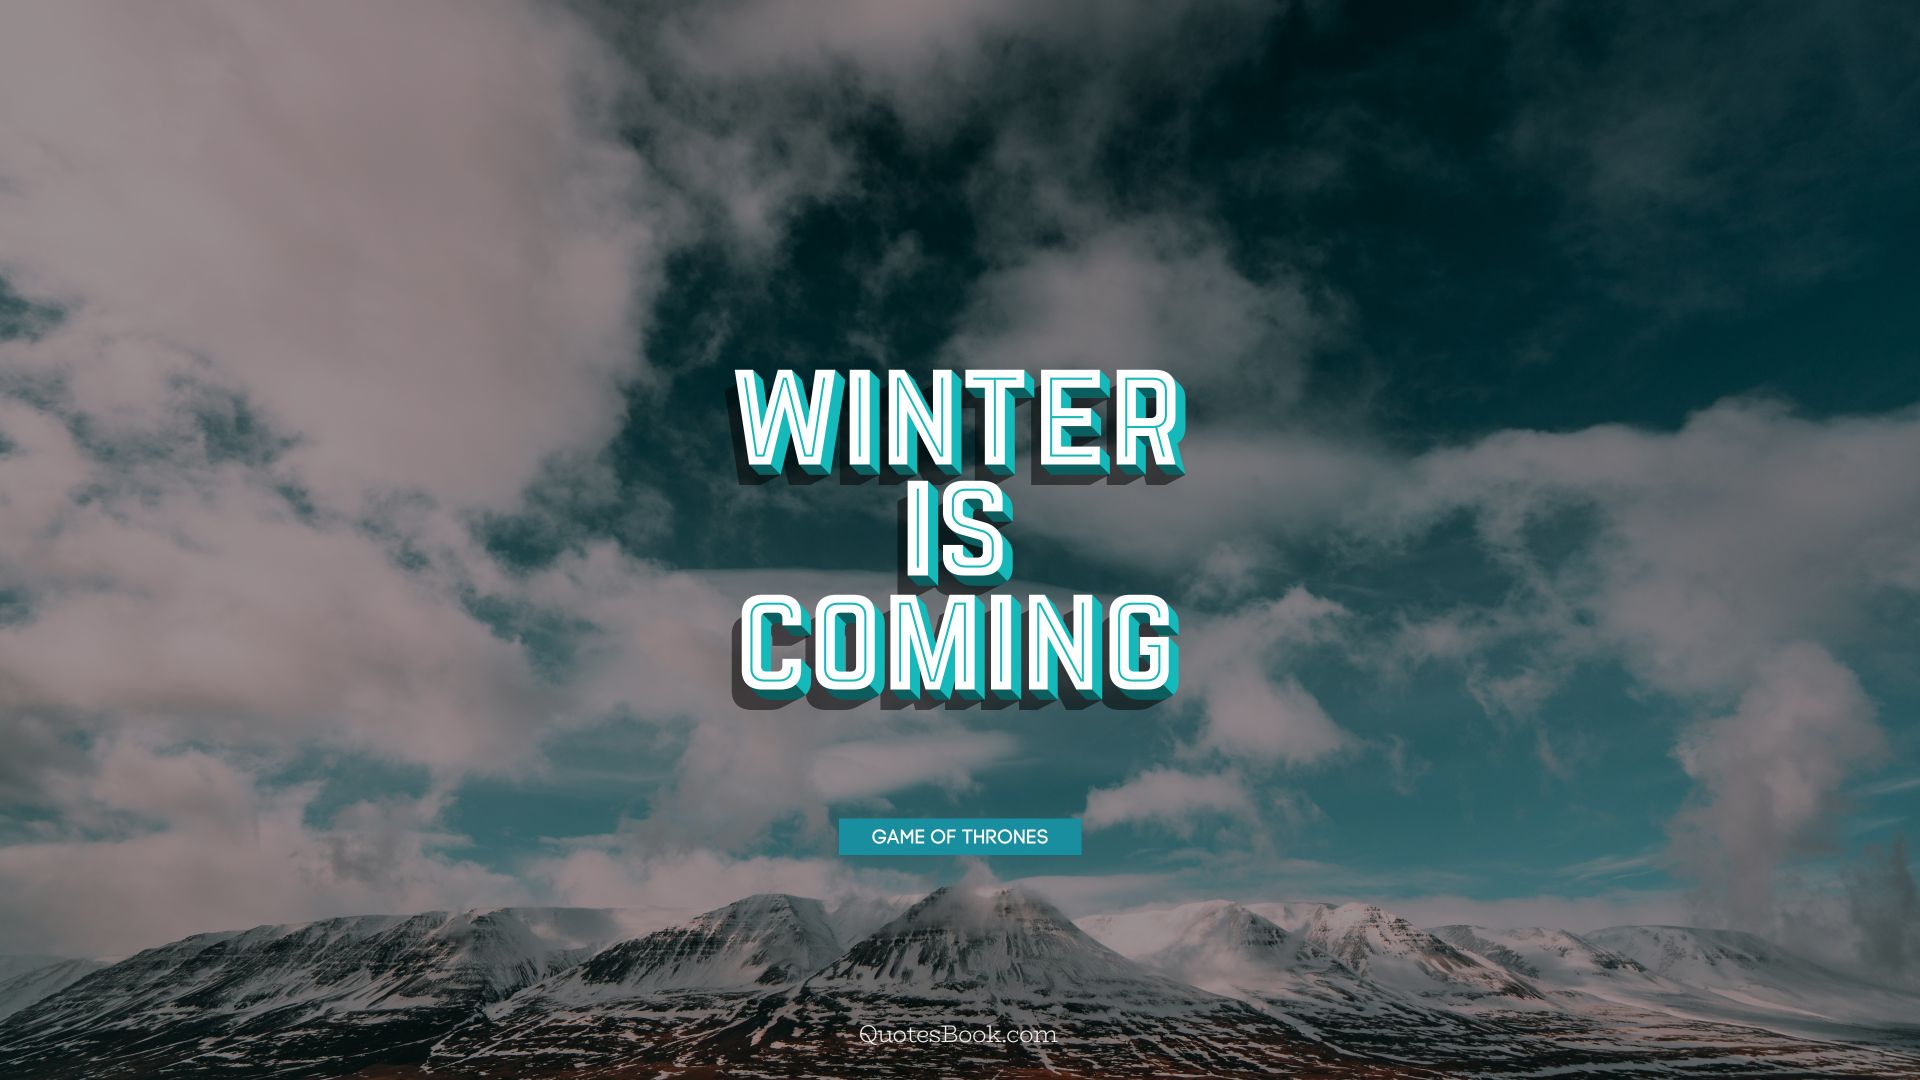 Winter is coming. - Quote by George R.R. Martin